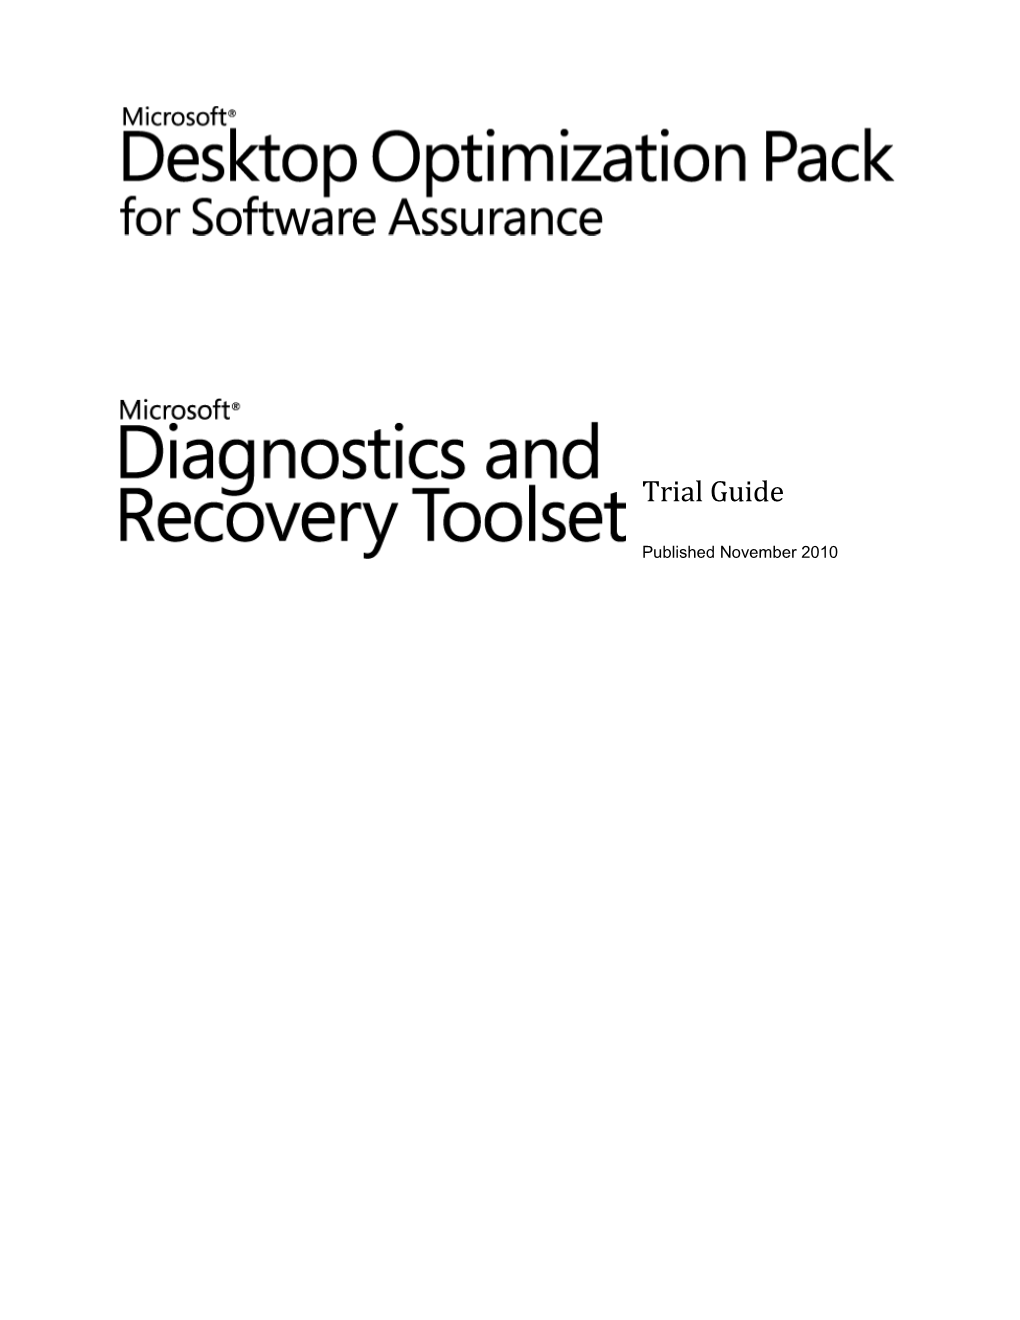 Microsoft Diagnostics and Recovery Toolset Version 6.5 Trial Guide